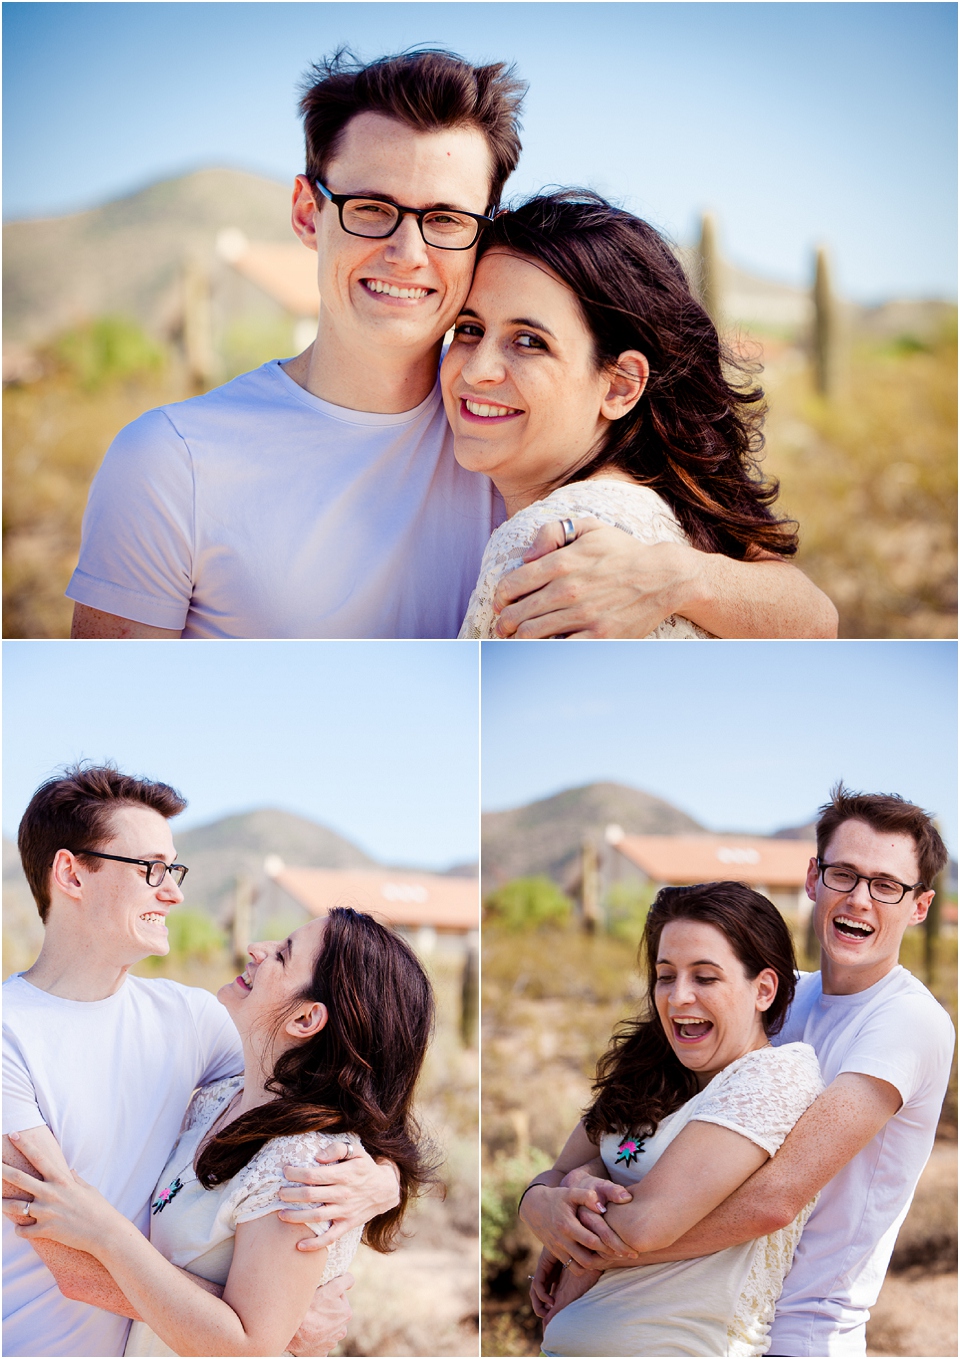 Twister engagement session